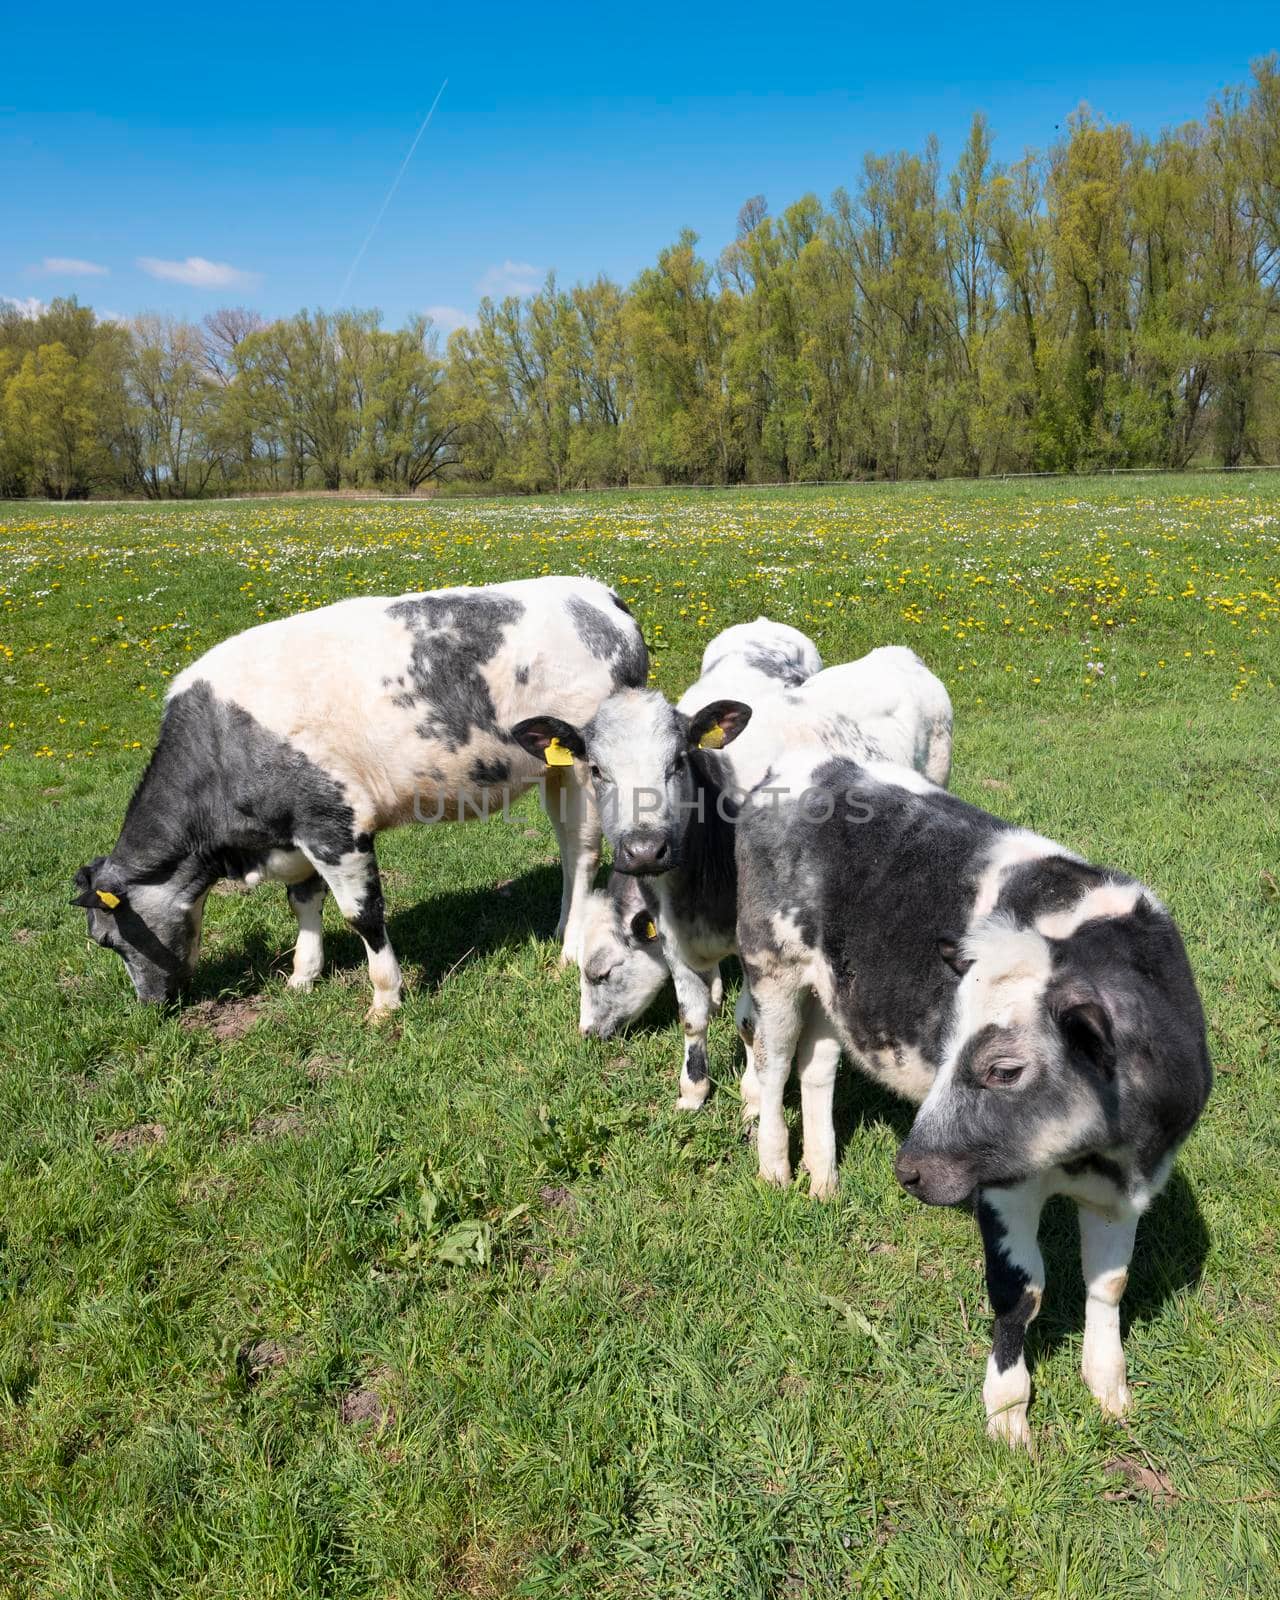 calves in grassy meadow with spring flowers on sunny spring day under blue sky in dutch area land van maas en waal in the netherlands